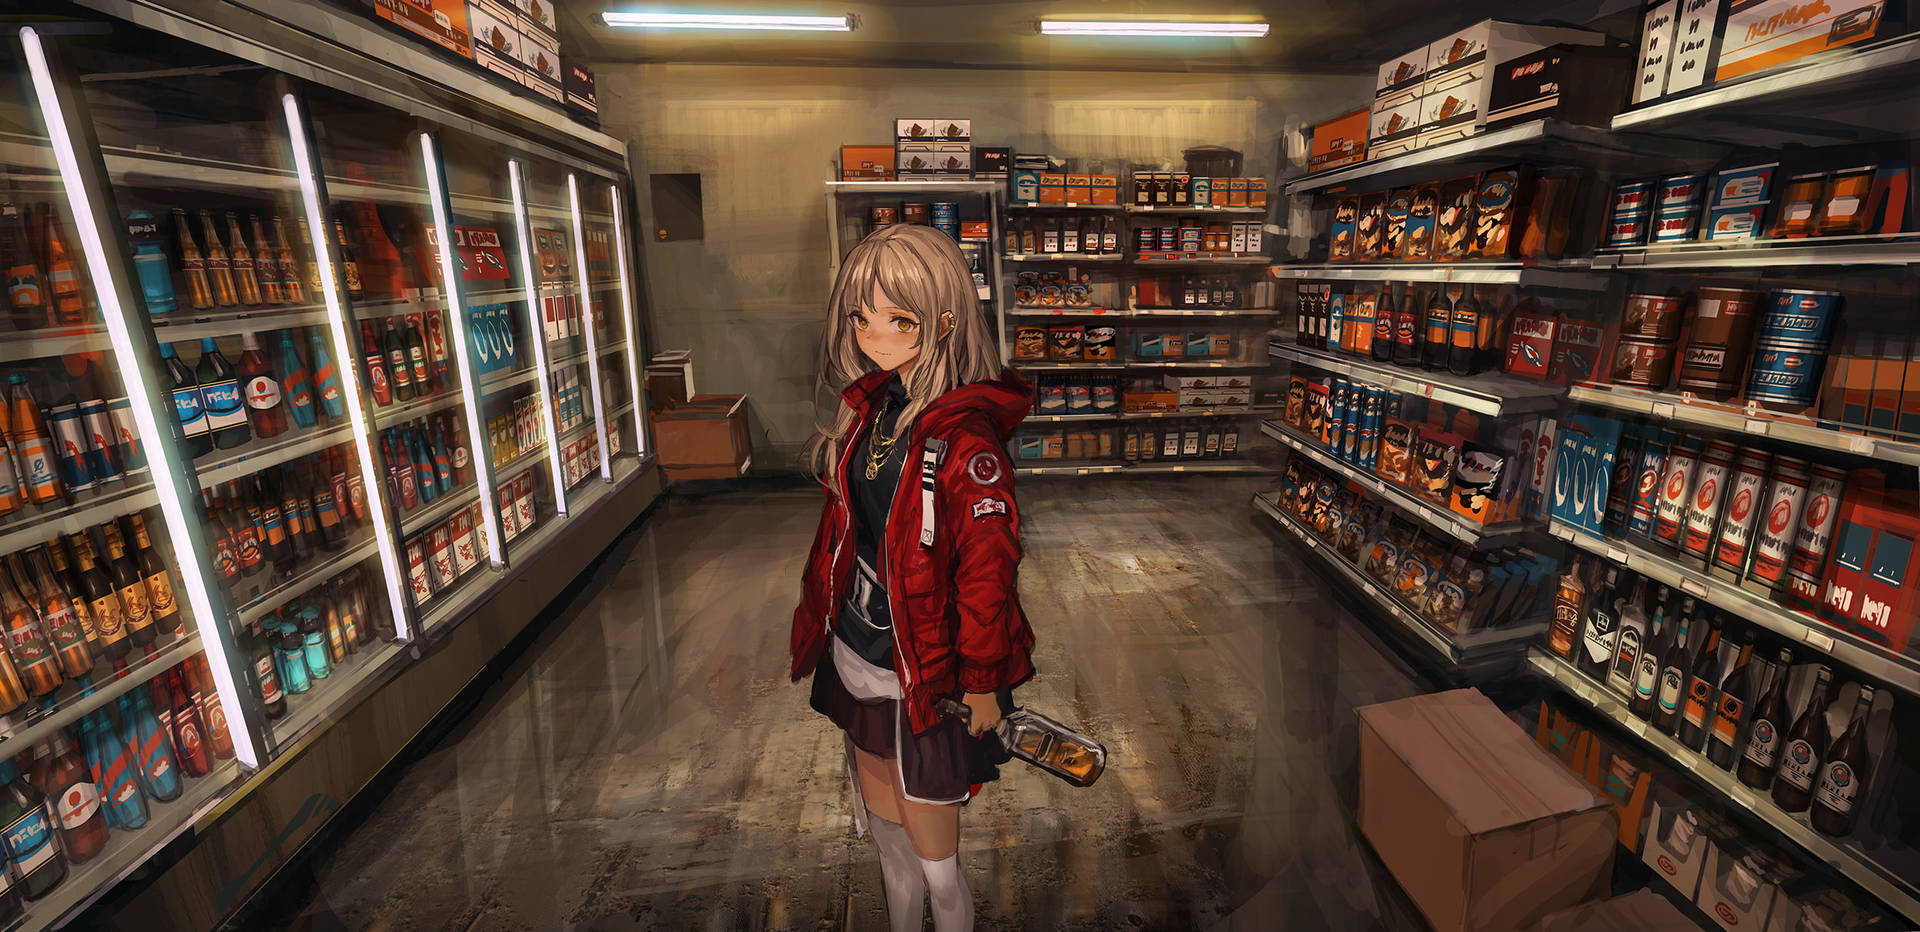 Wallpaper anime, blonde, anime, the animated series, shelves, supermarket,  animated series, Lycoris Recoil, Lycoris Rikoil images for desktop, section  сёнэн - download